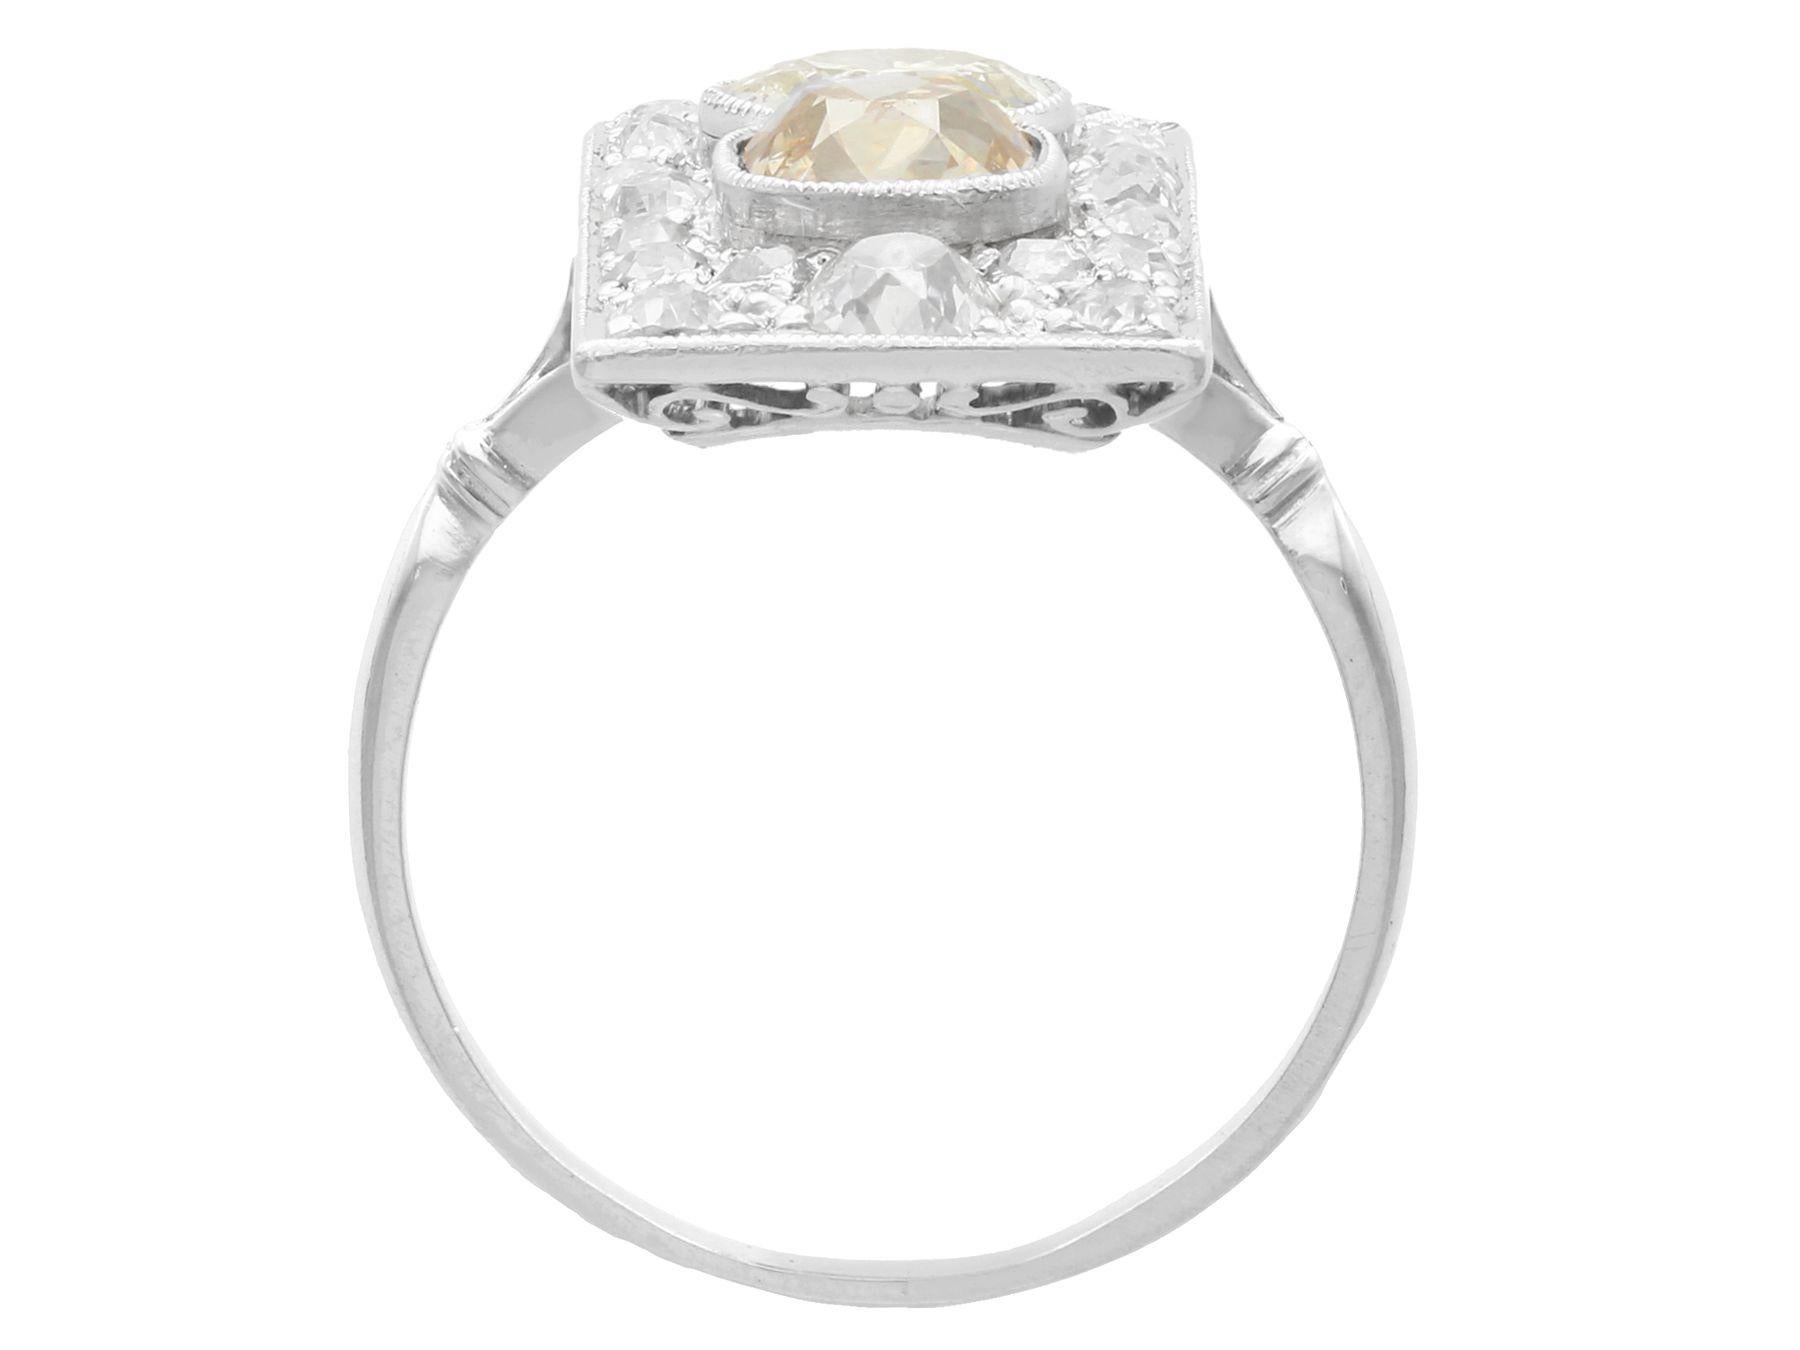 Women's or Men's 1900s Antique French 3.24 Carat Diamond and Platinum Cocktail Ring For Sale